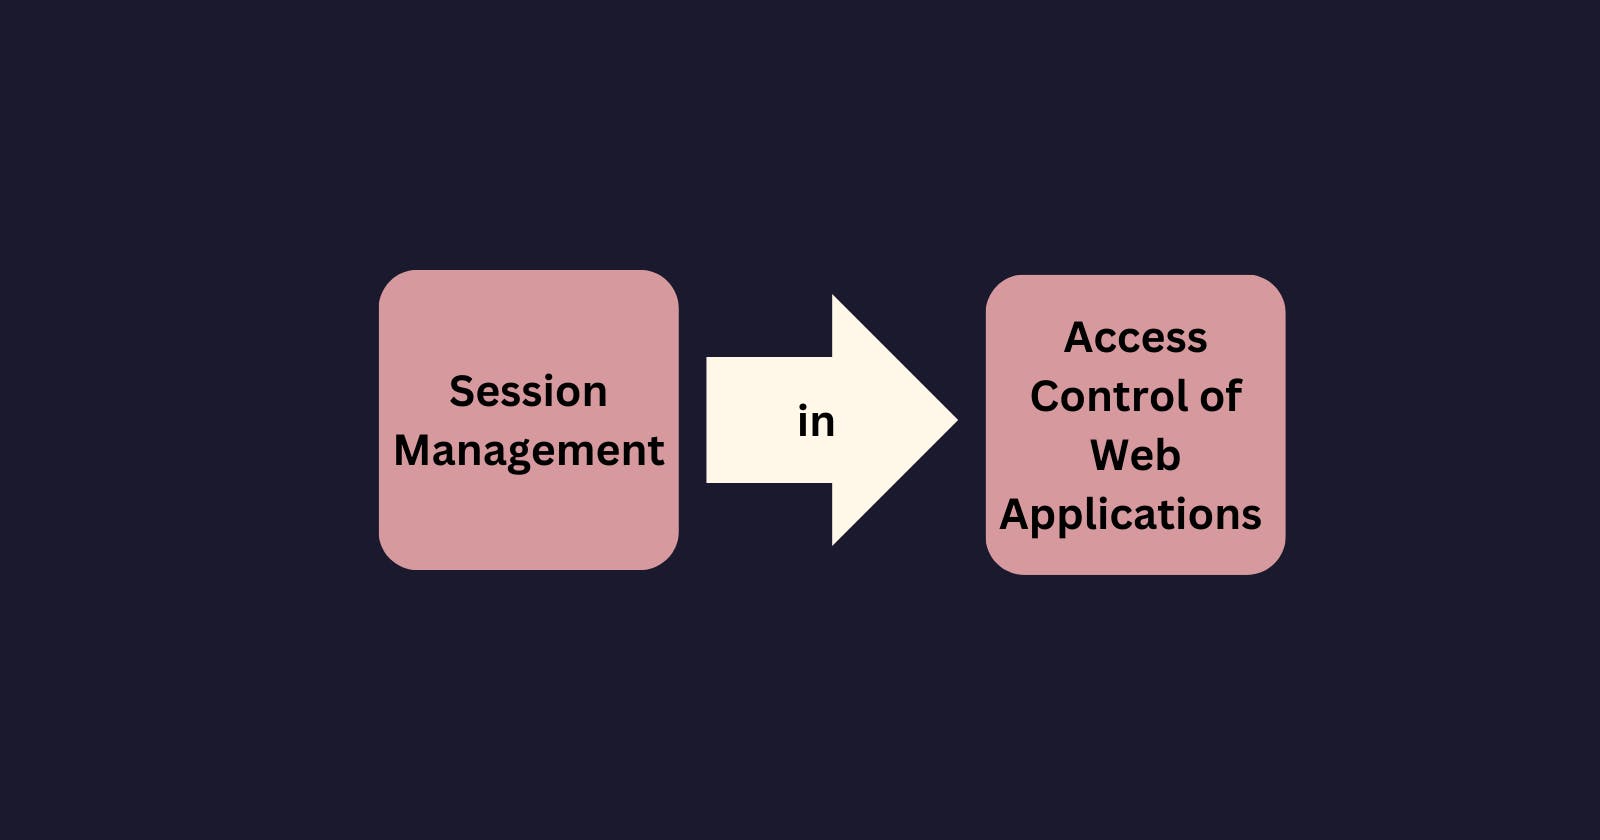 Session management in access control of web applications